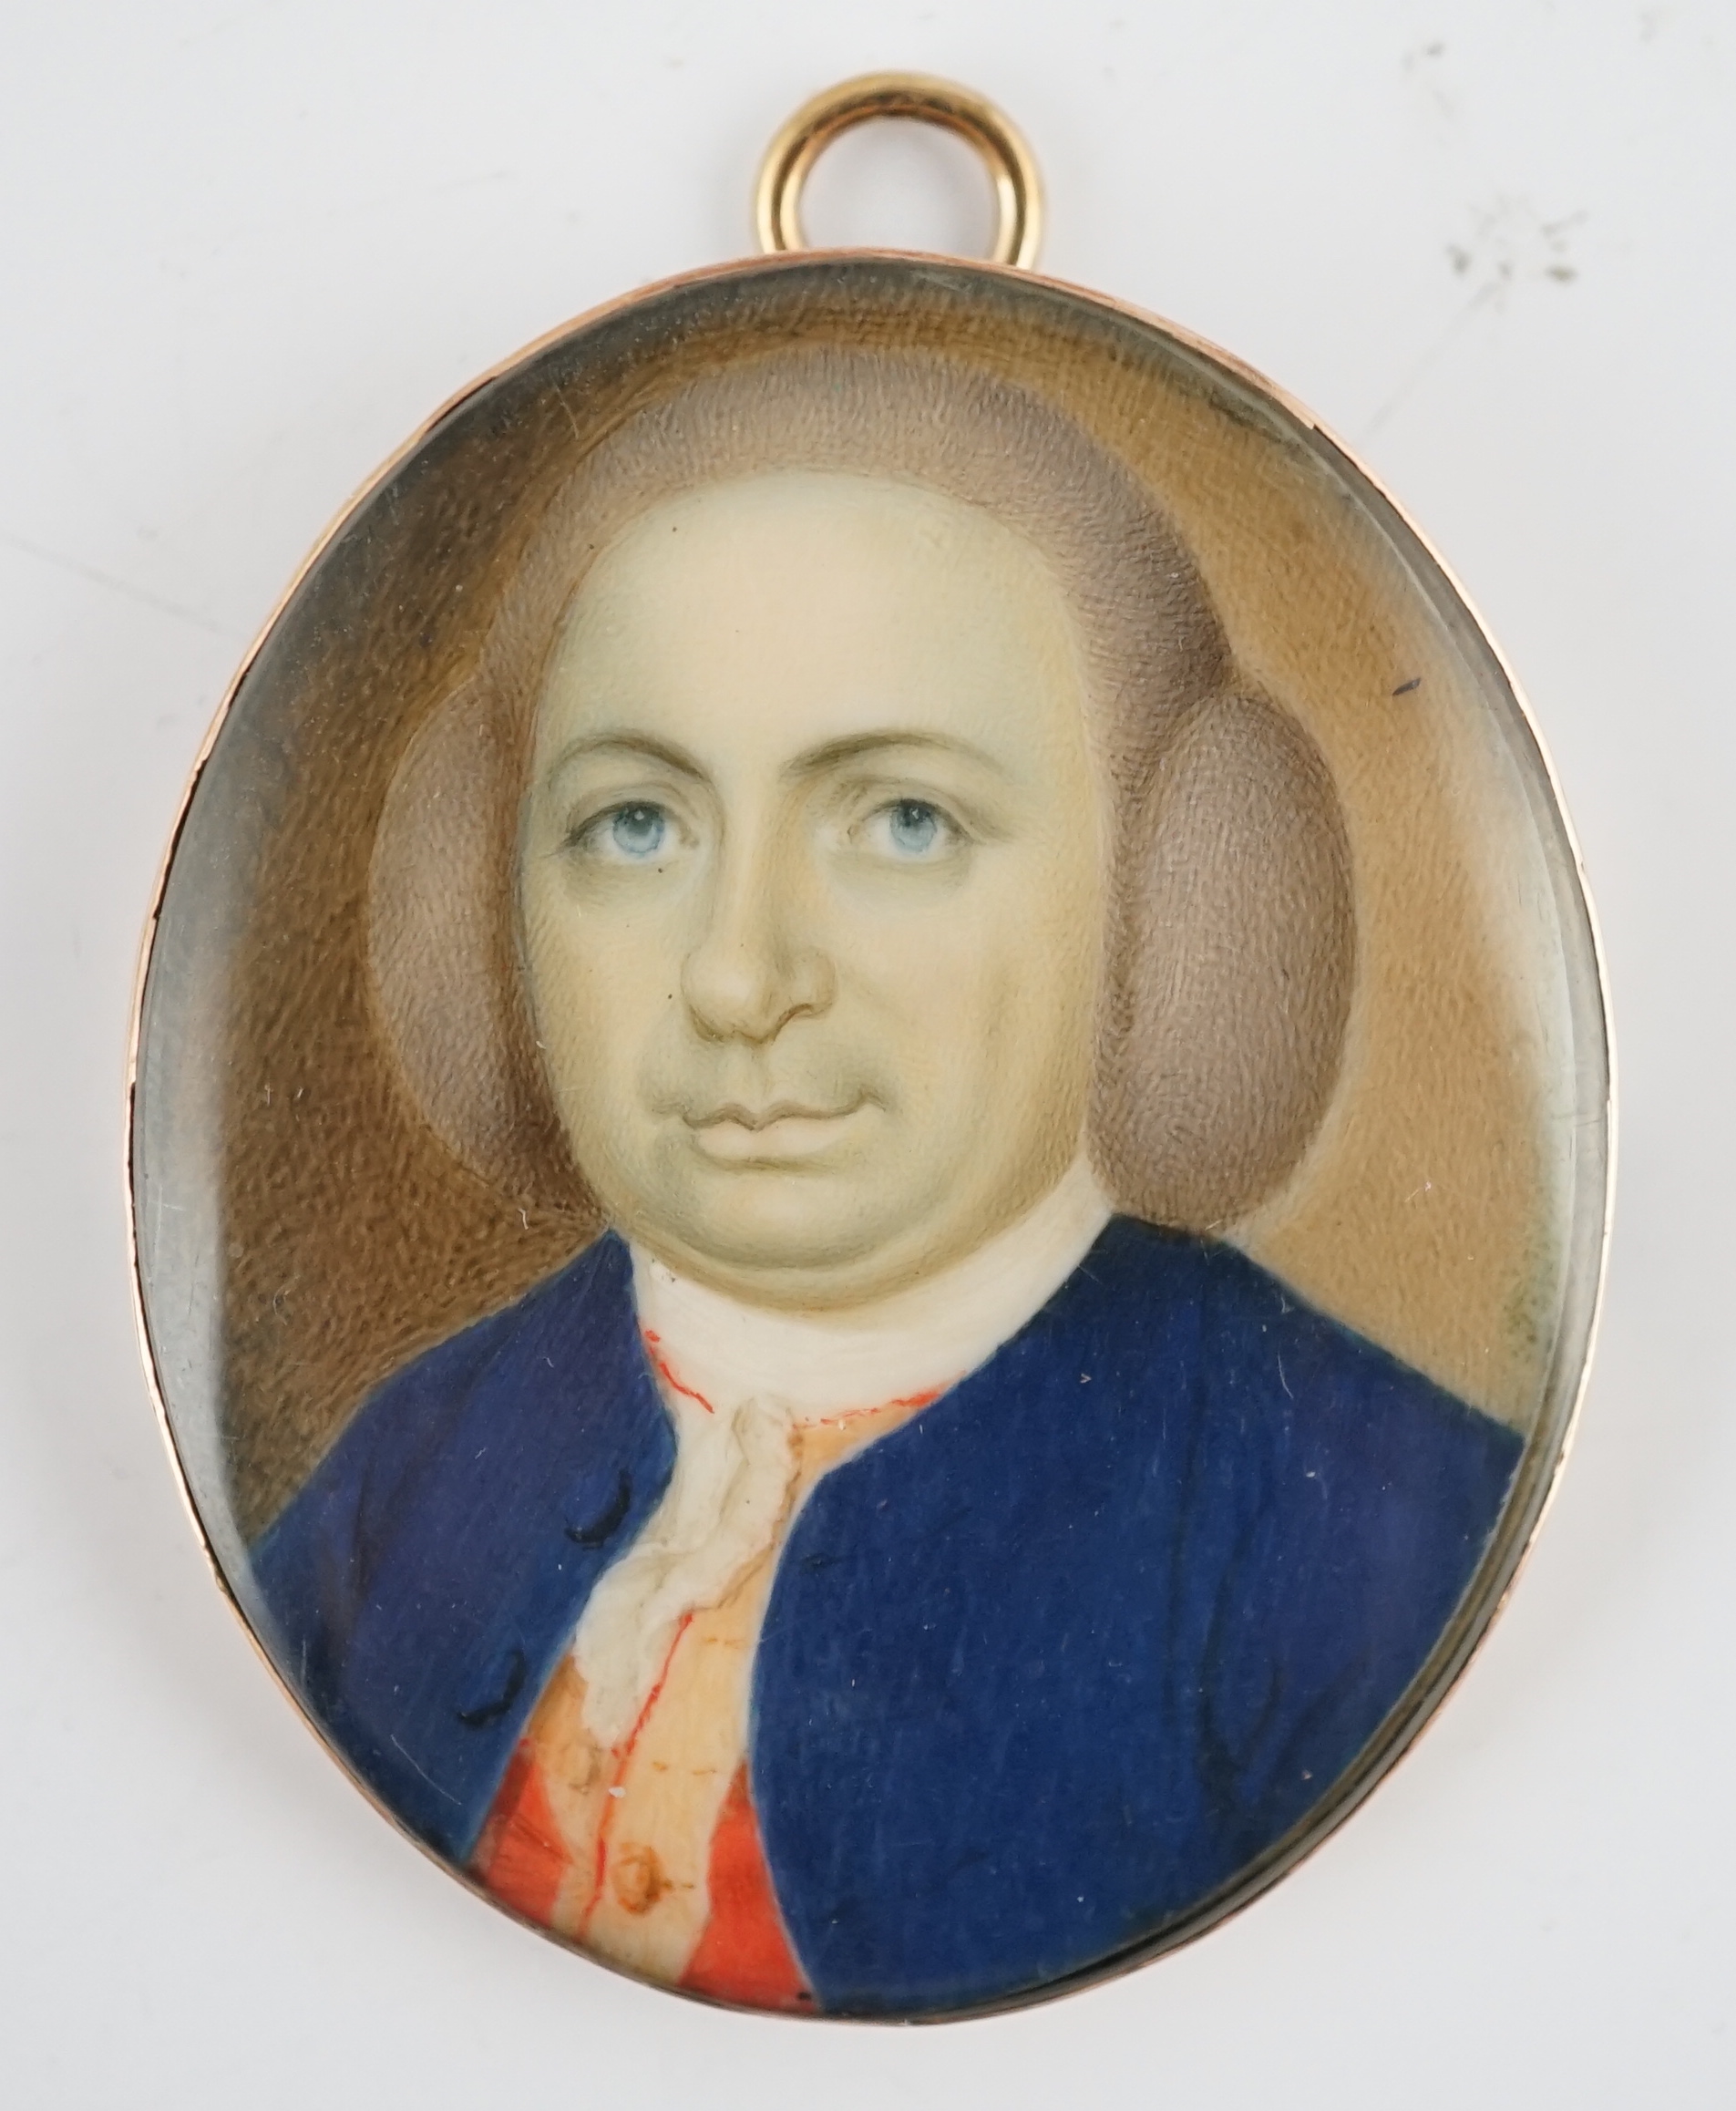 Jeremiah Meyer, R.A. (Anglo-German, 1735-1789), Portrait miniature of a gentleman, oil on ivory, 4 x 3.2cm. CITES Submission reference YZCZ4G62